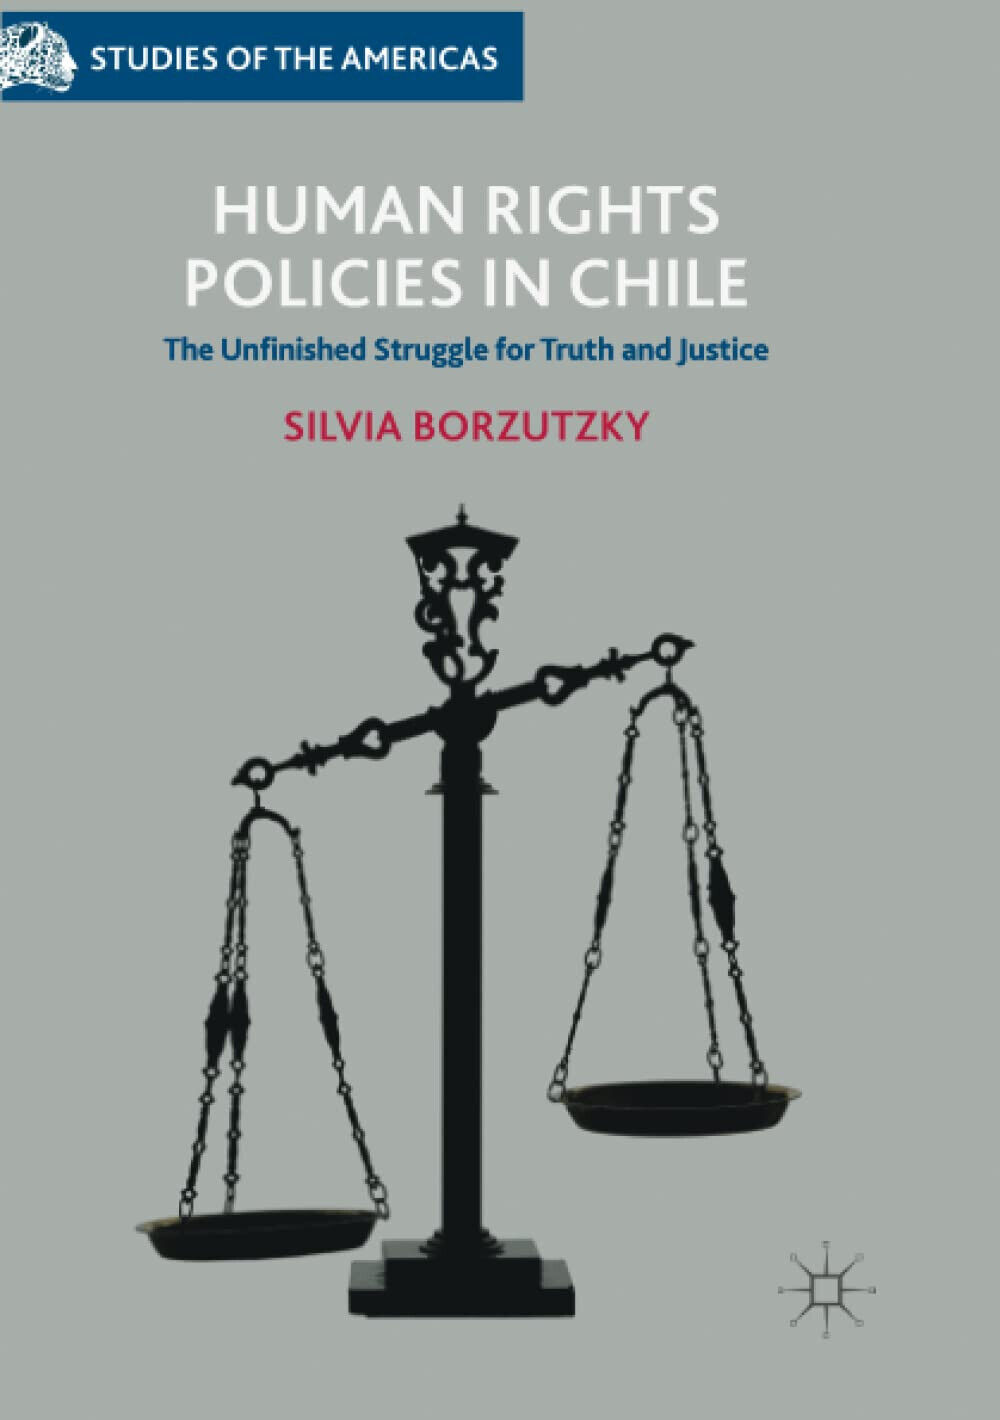 Human Rights Policies in Chile - Silvia Borzutzky - Palgrave, 2018